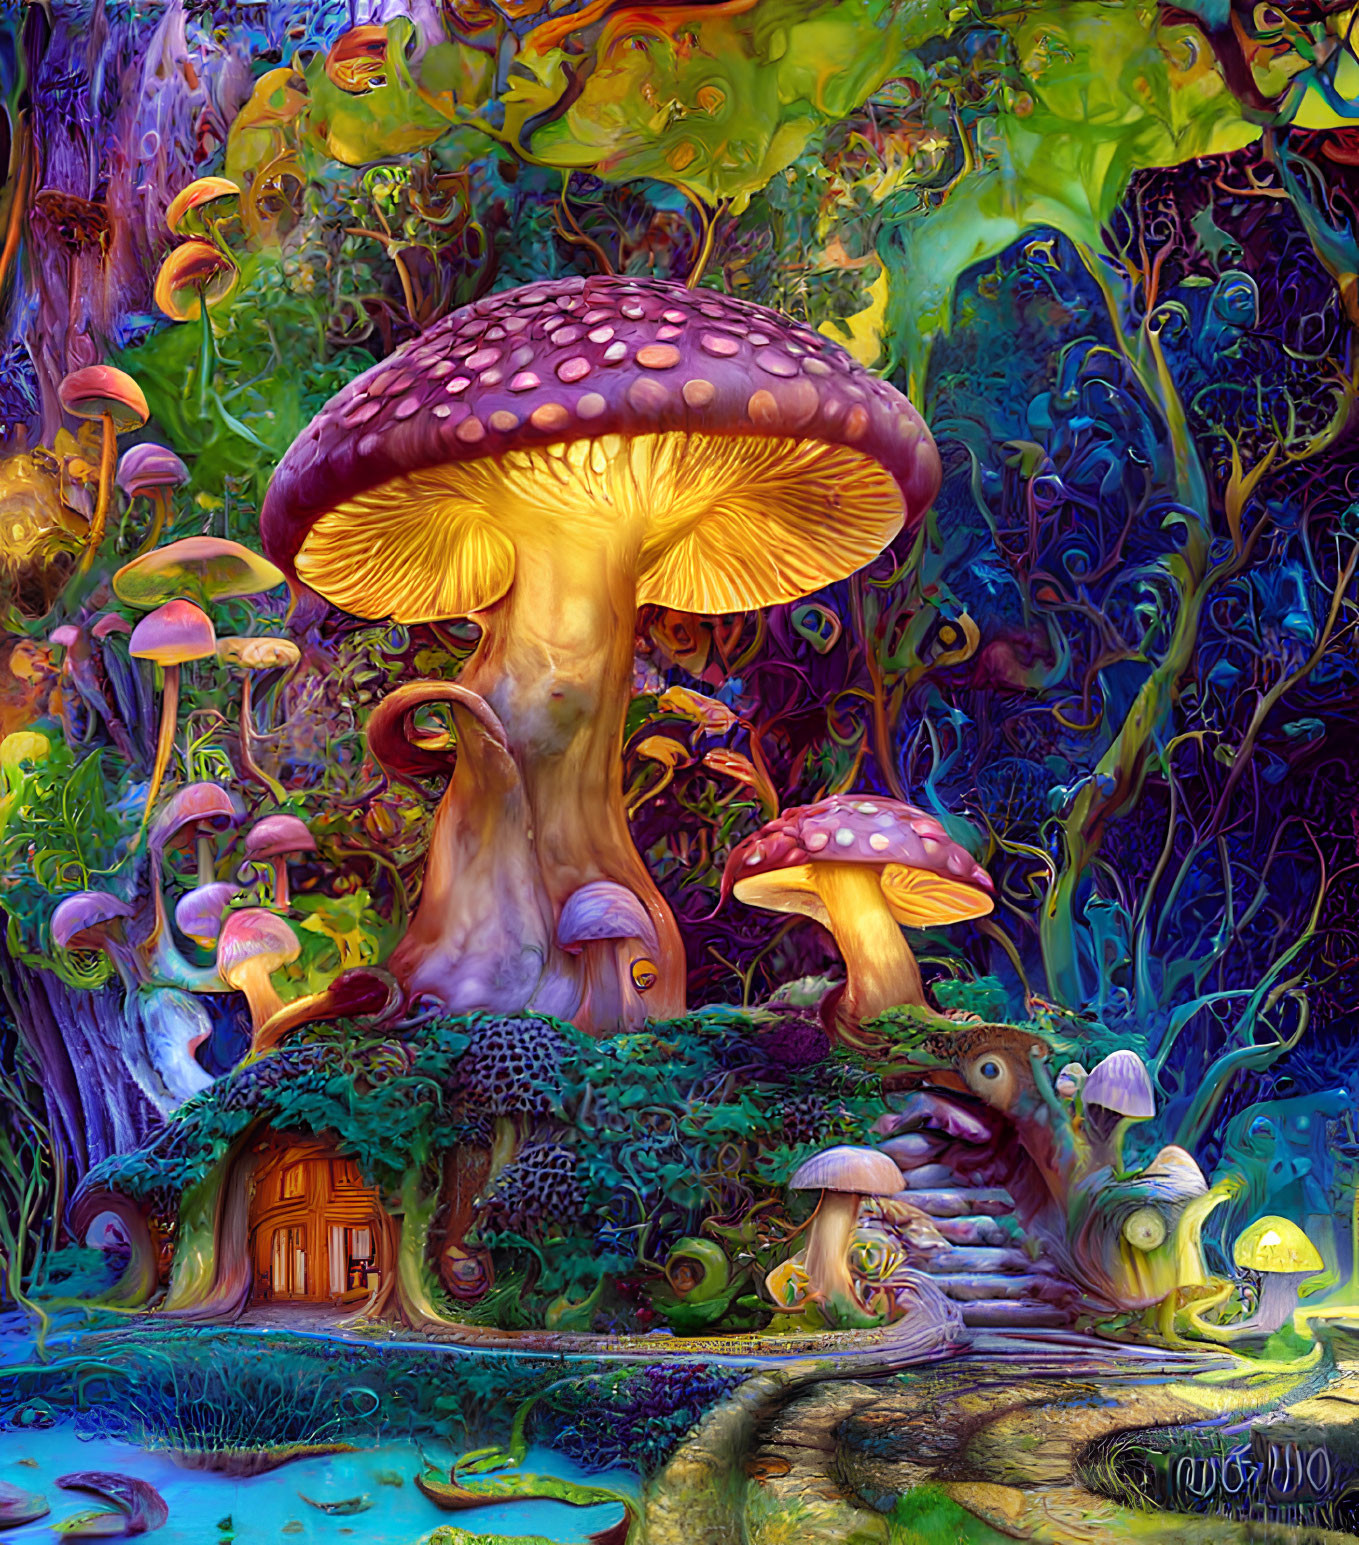 Fantasy illustration of oversized mushrooms in magical forest